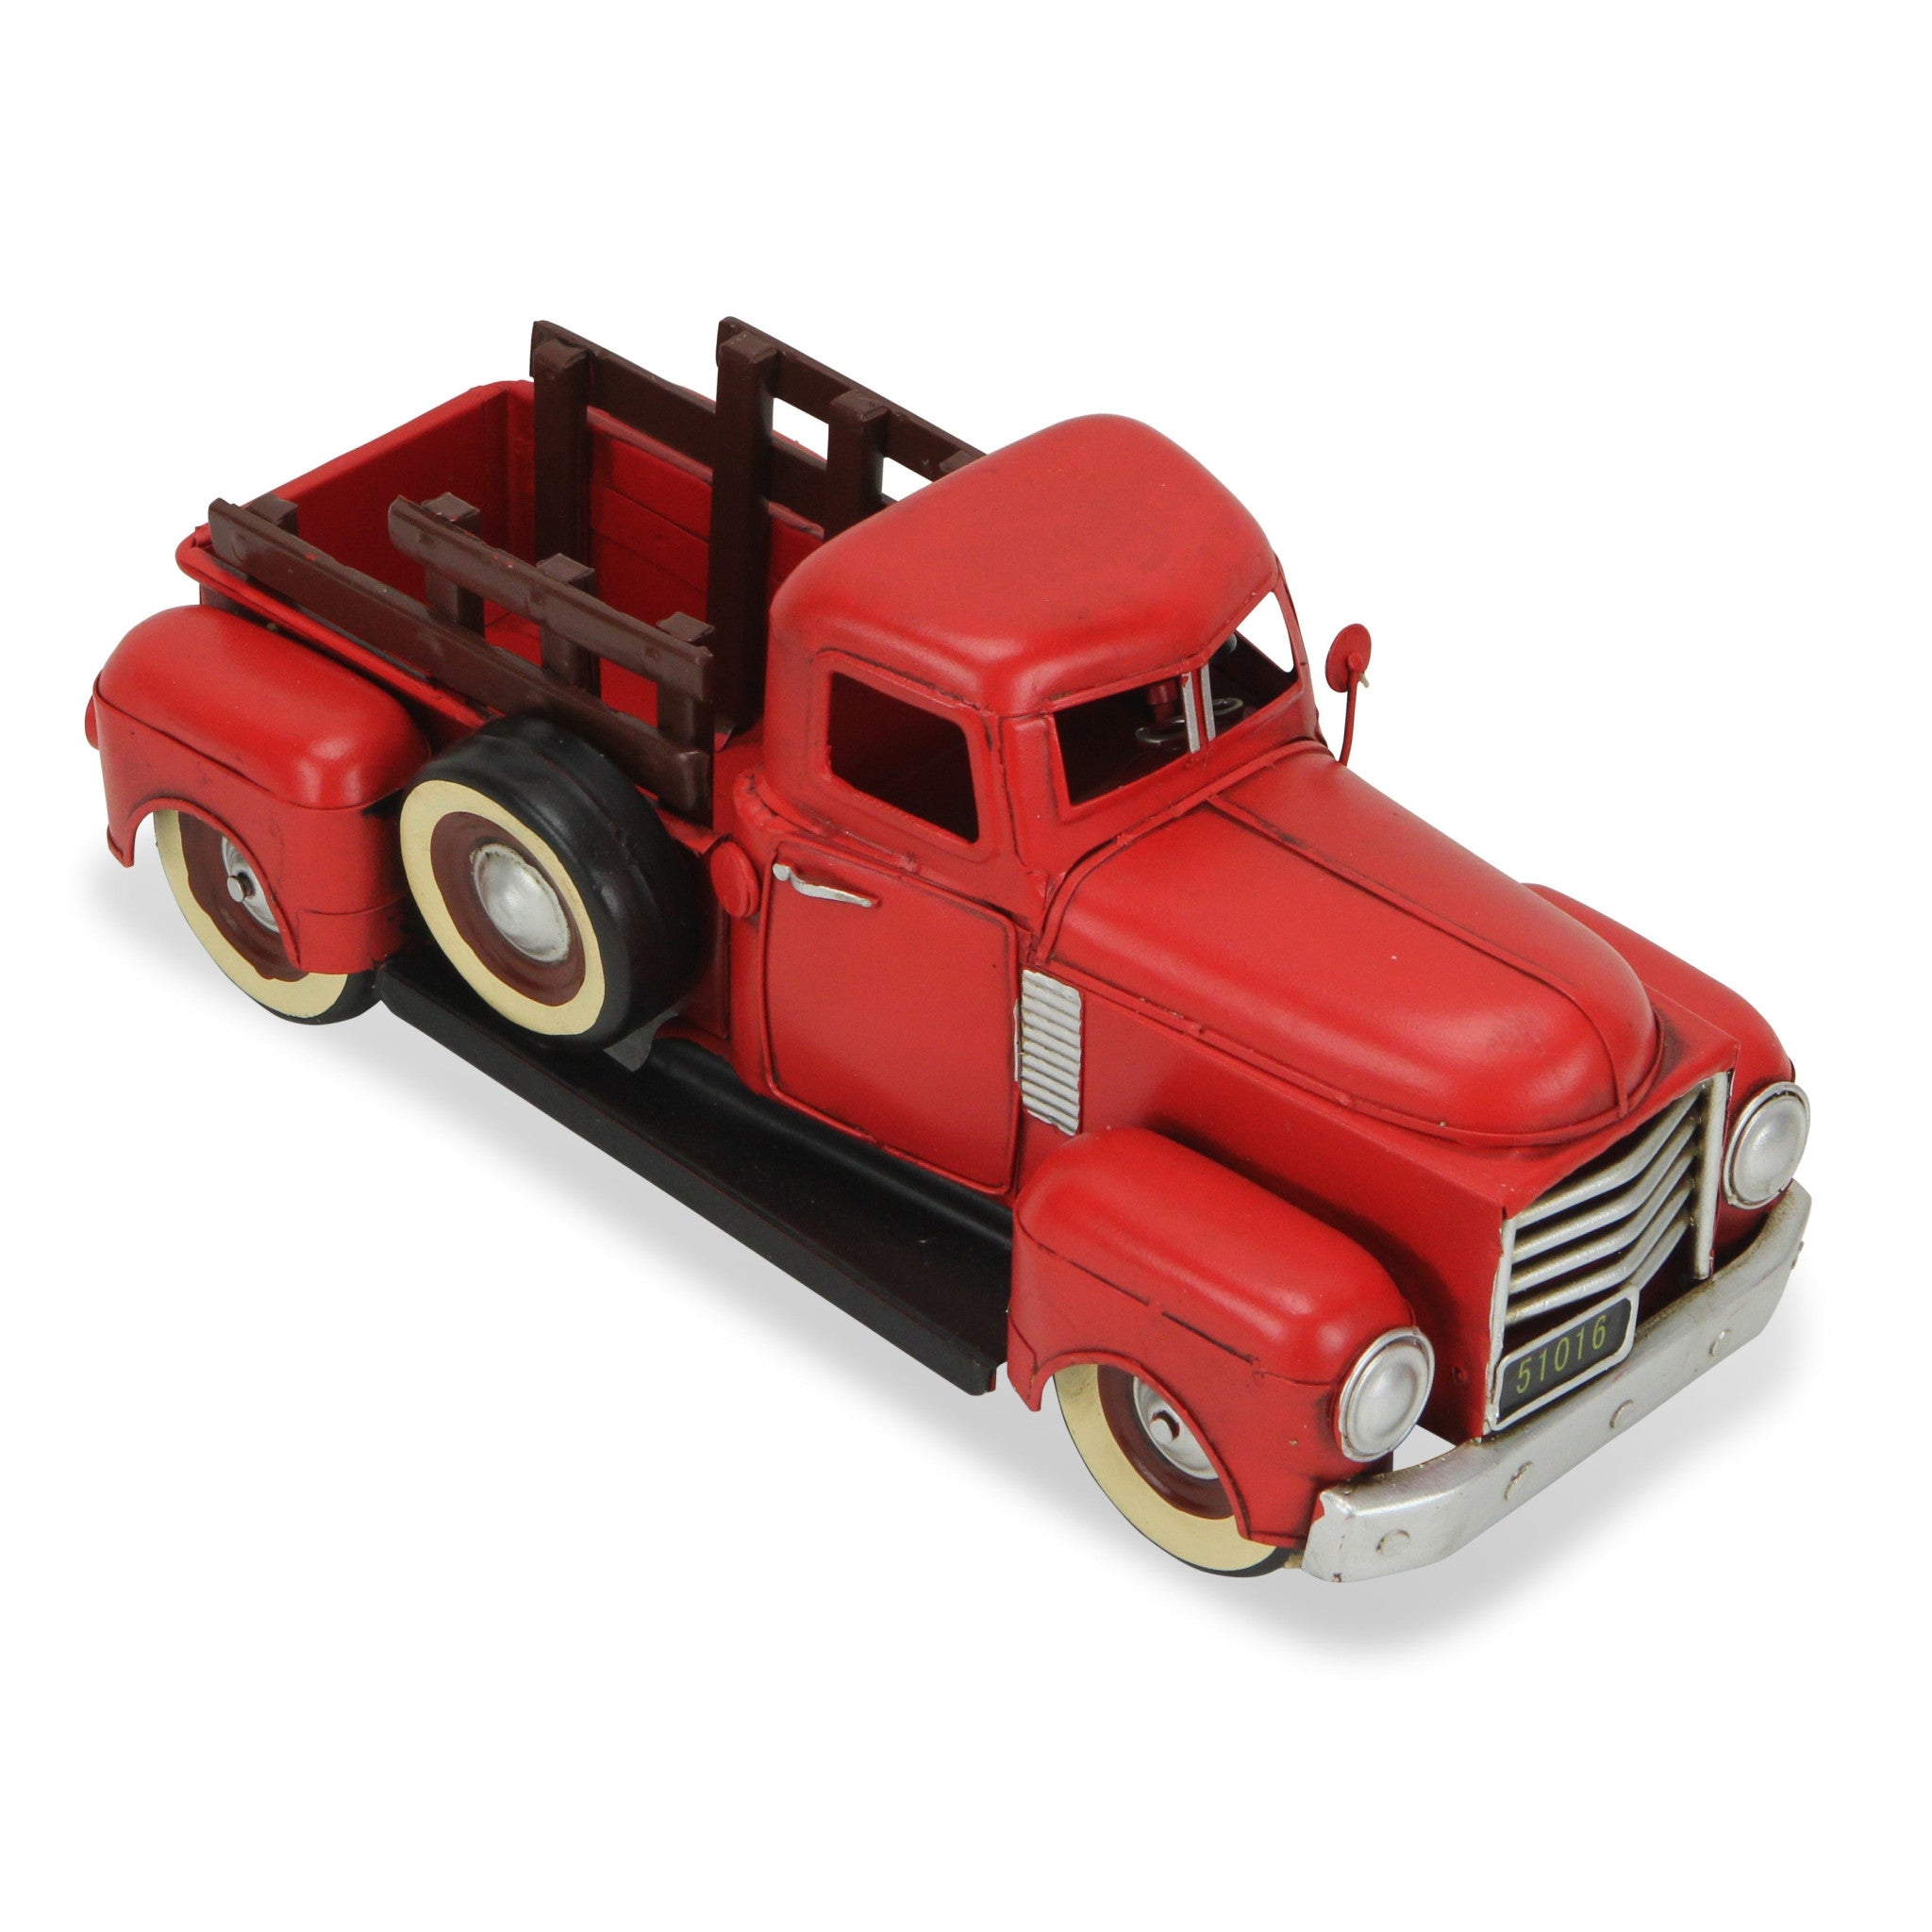 6" Red and Black Metal Hand Painted Model Car